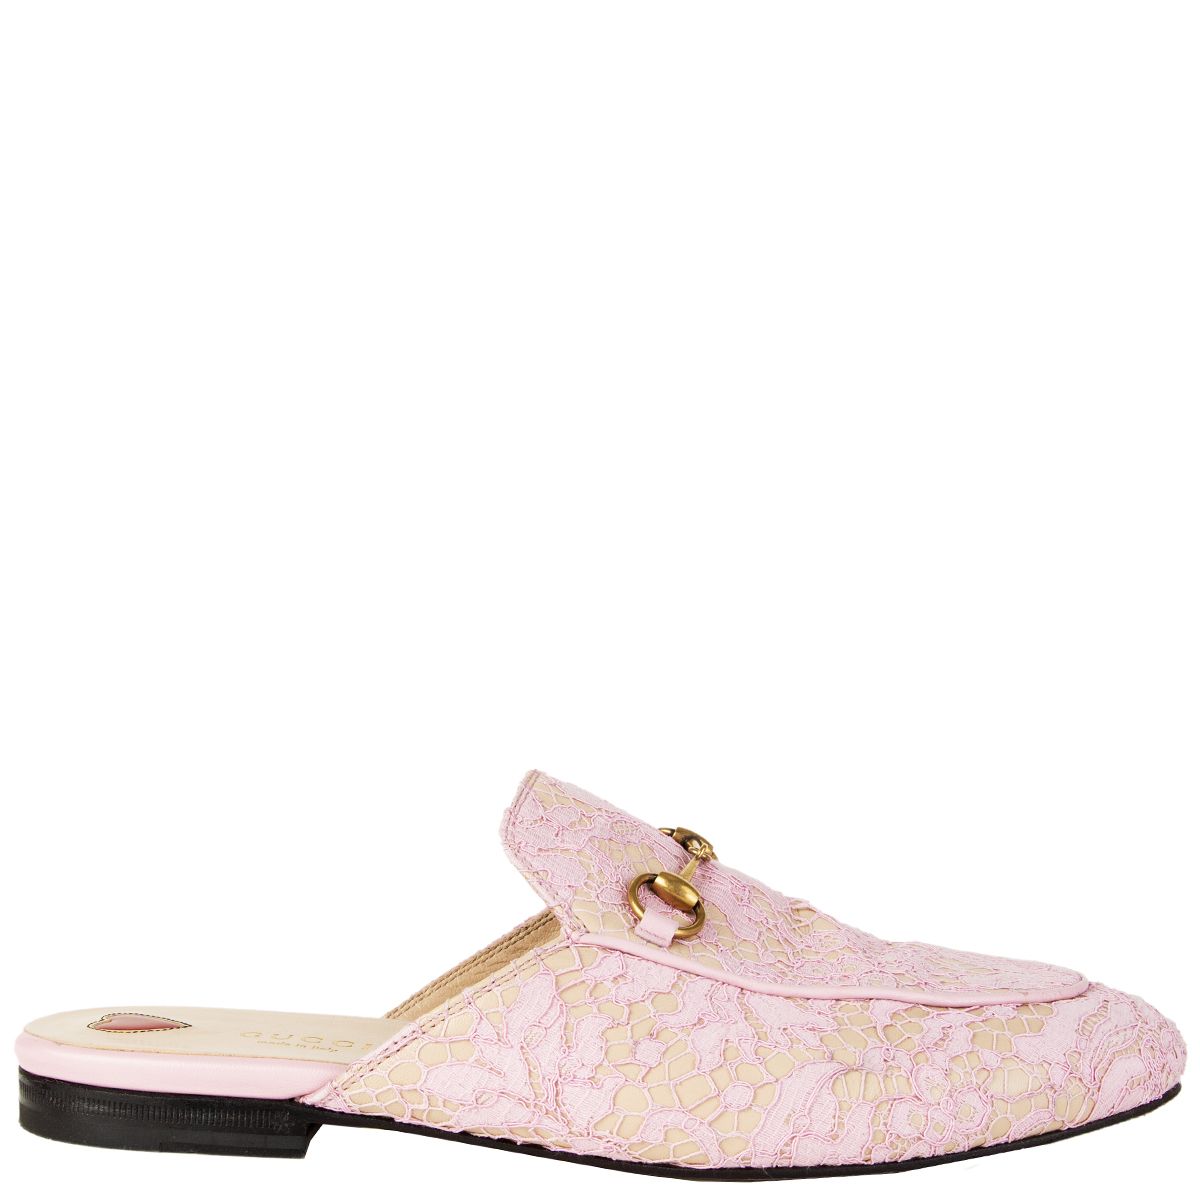 Gucci 'Princetown' Slipper Mules Loafers Pink Lace Leather